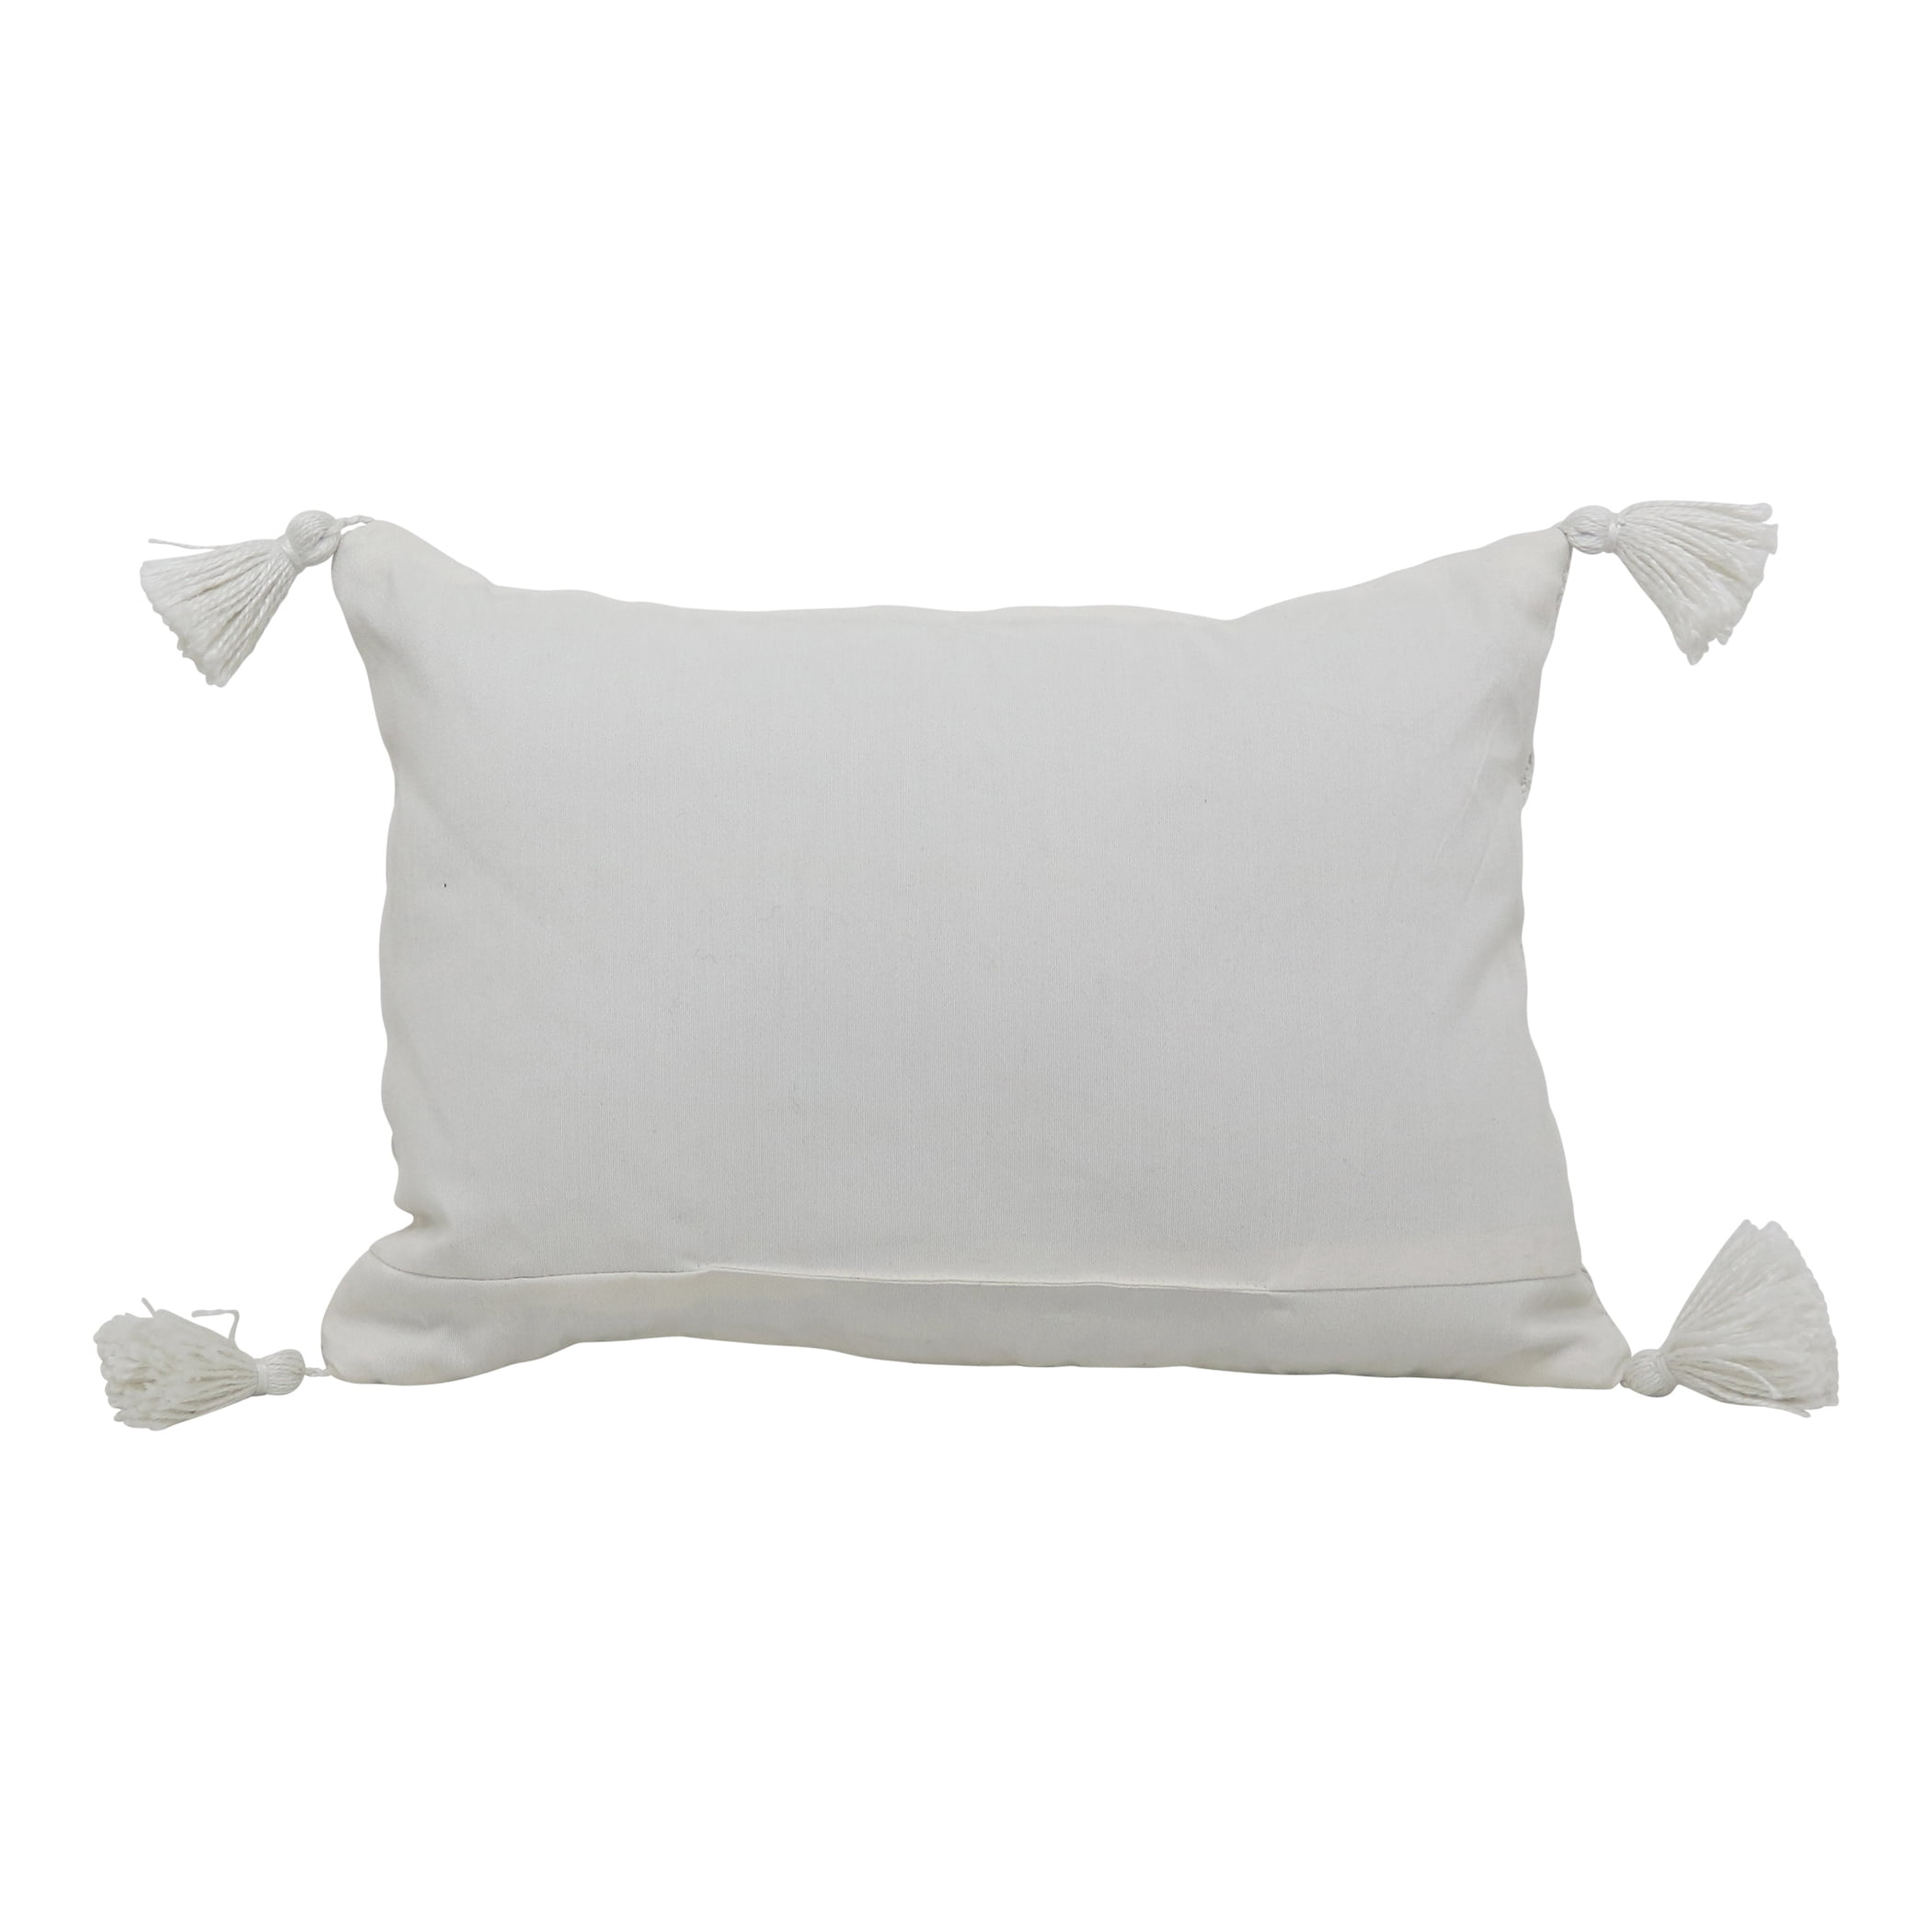 Better Homes & Gardens, Ivory Arches Decorative Pillow, Square, 20